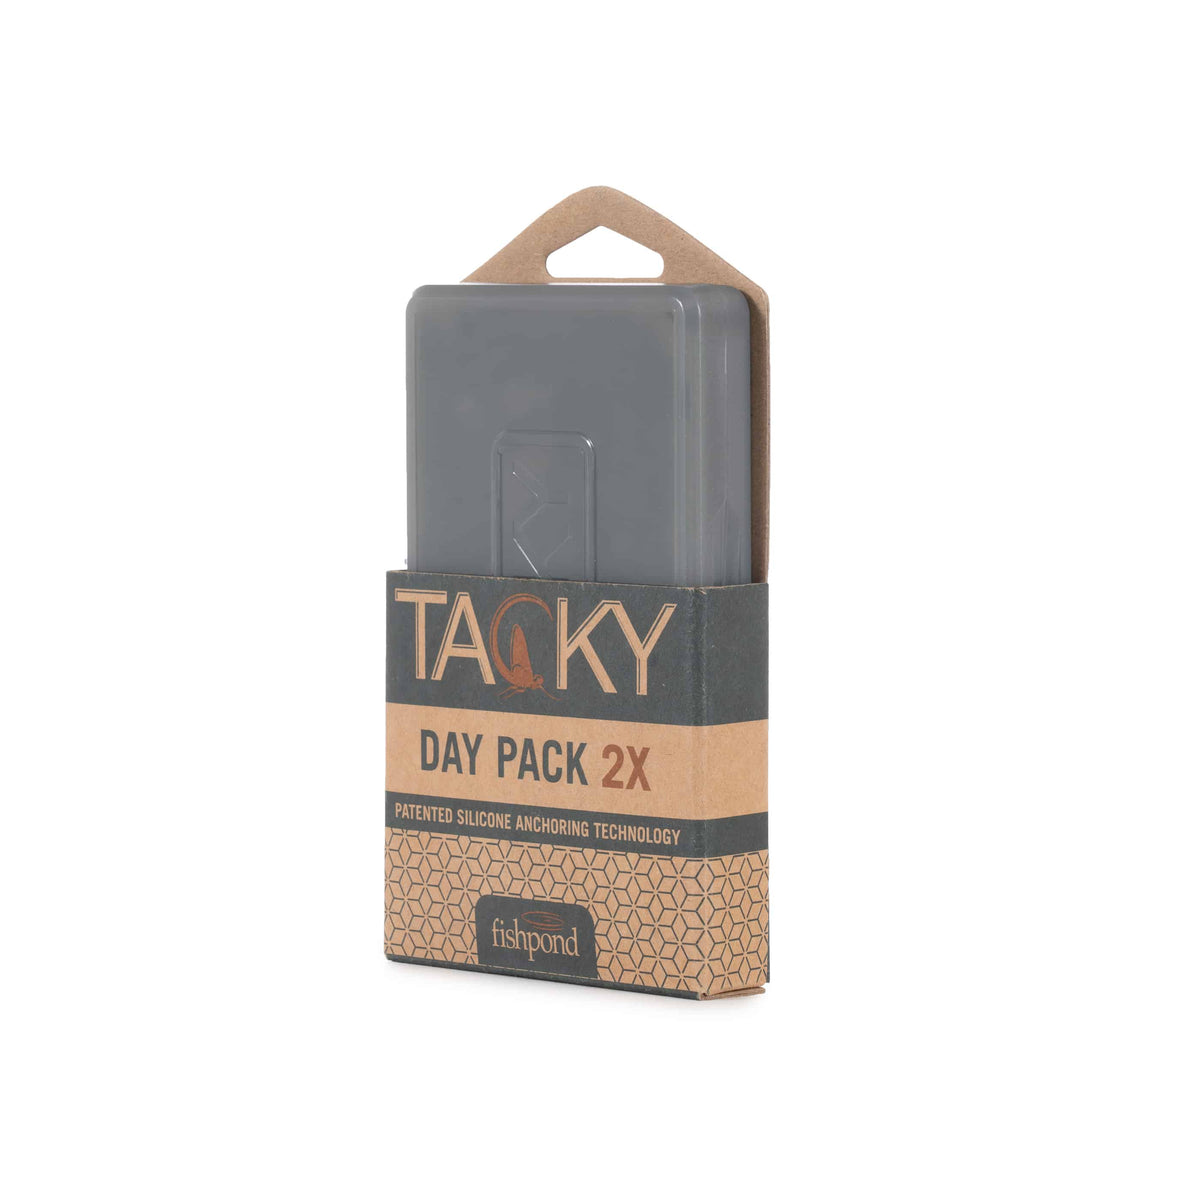 Tacky Day Pack Fly Box 2X Double Sided Fly Box With Silicone Storage Package